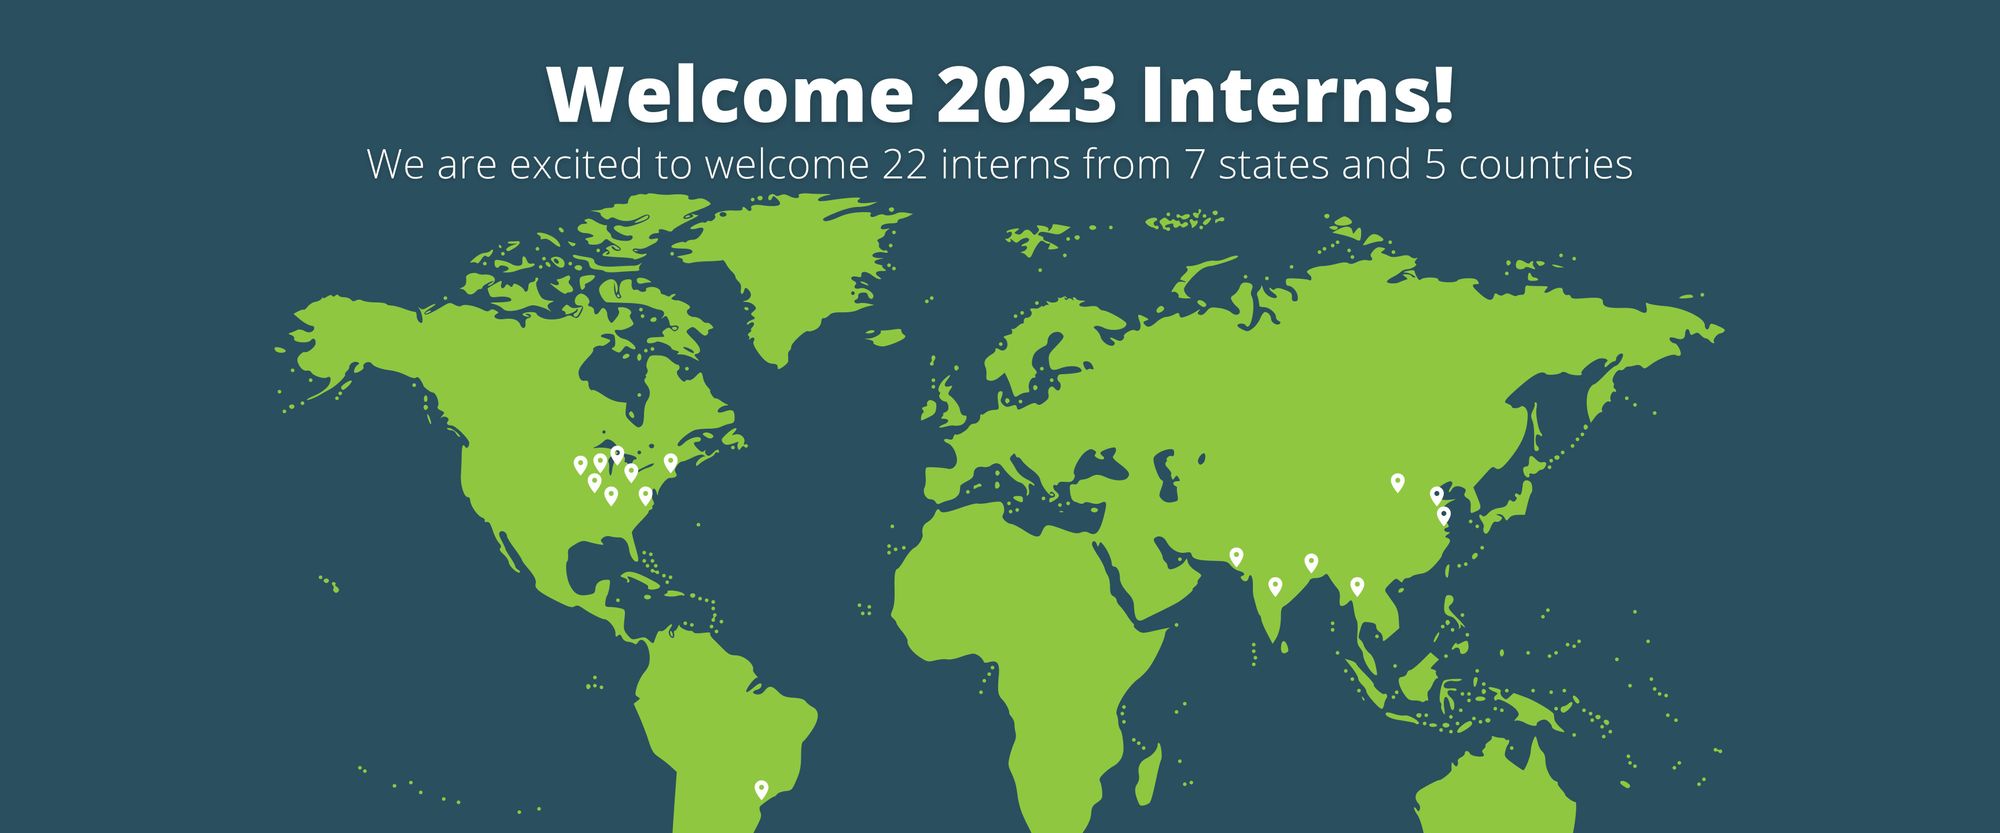 enFocus Welcomes the largest intern cohort to-date